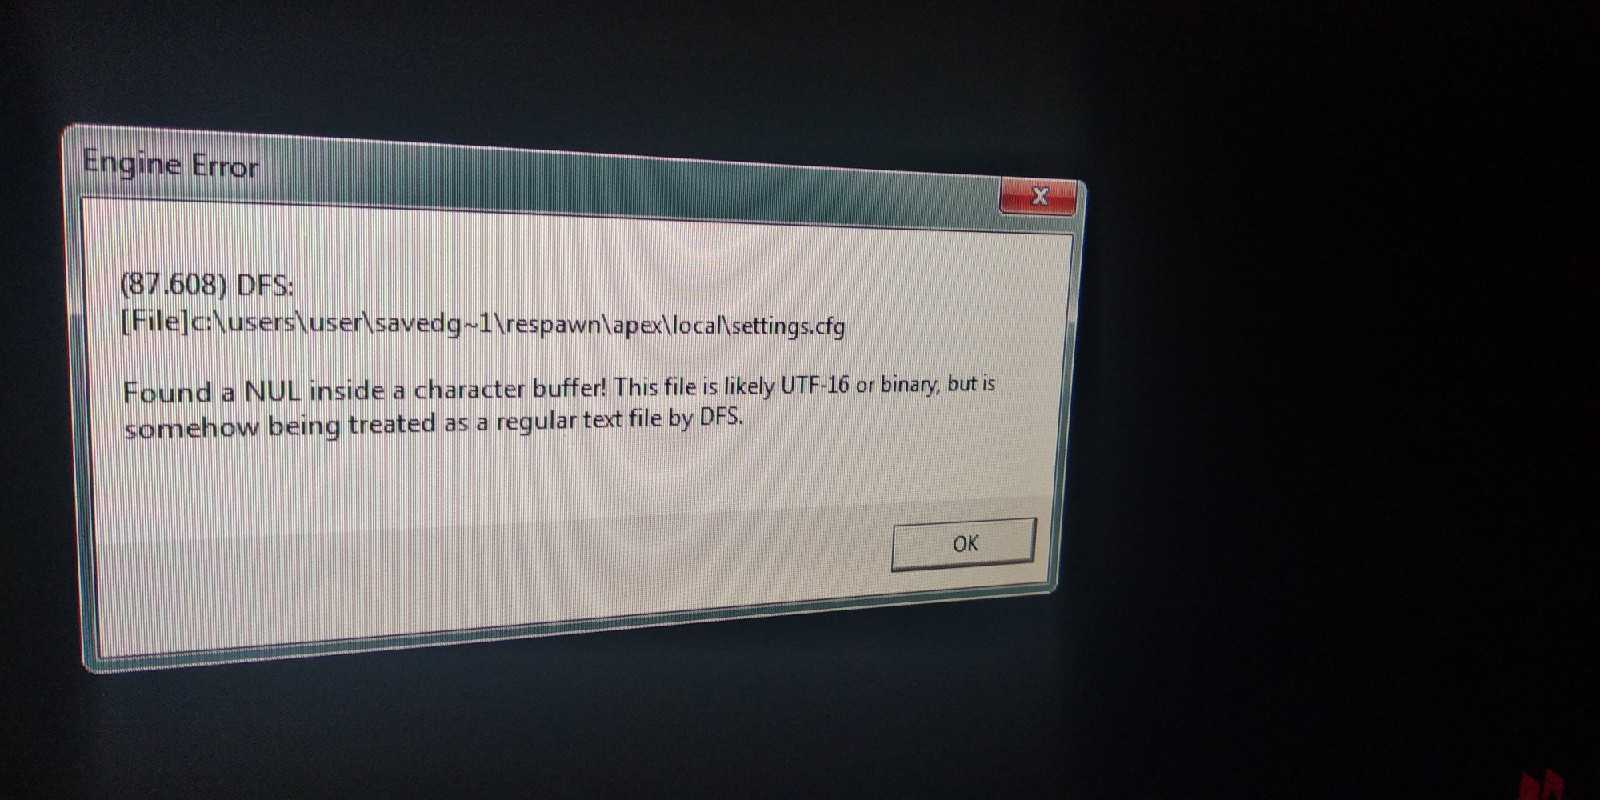 ошибка в кс fatal error failed to connect with local steam client process фото 114